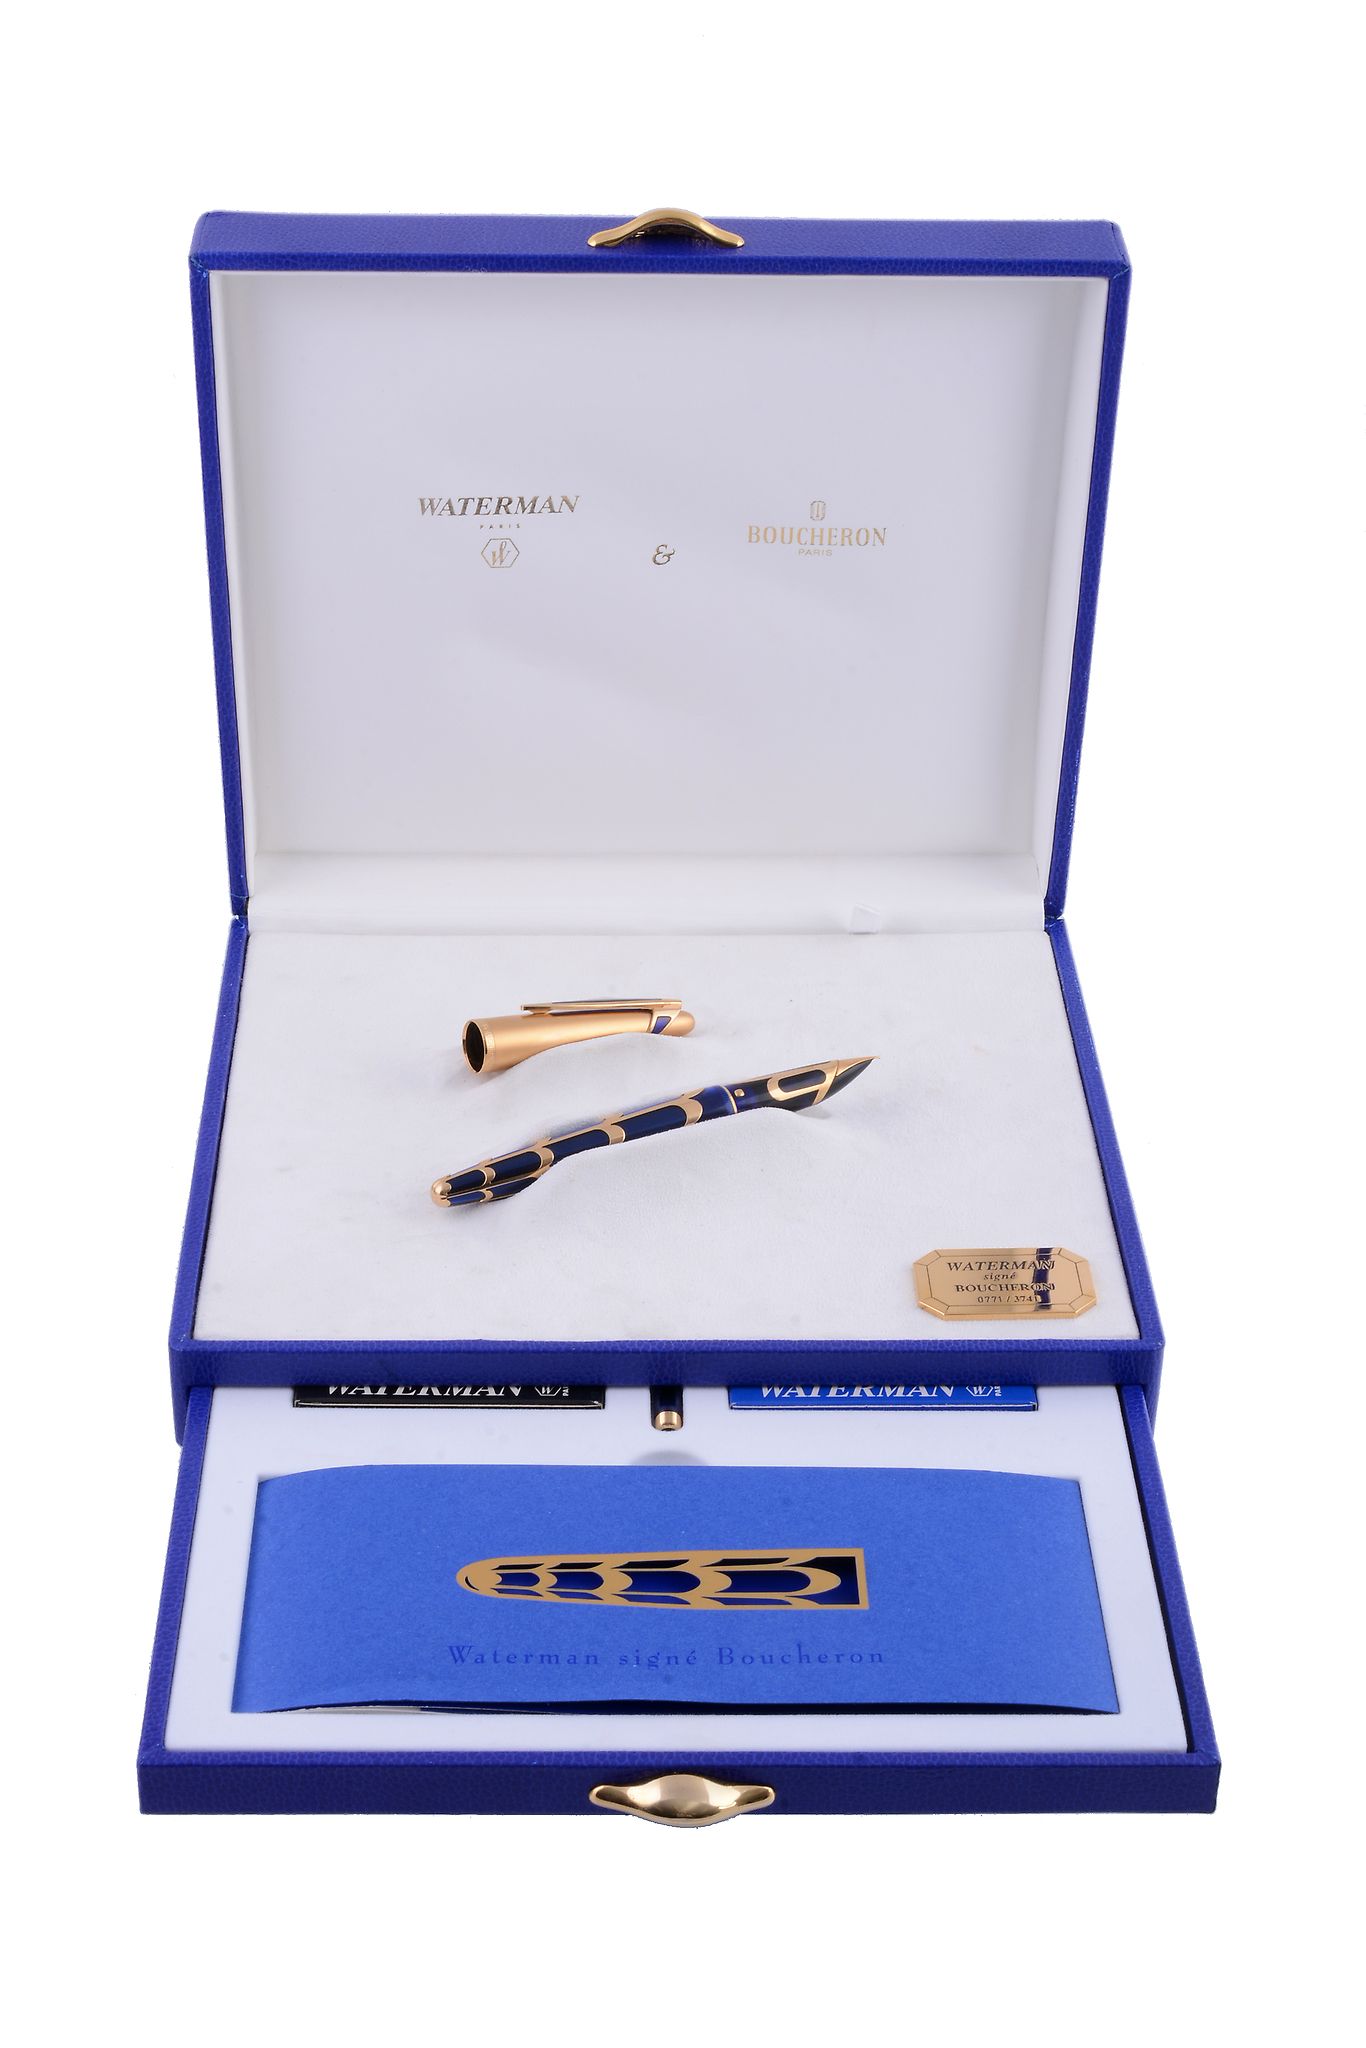 Waterman, Boucheron, a limited edition blue resin and gold filigree fountain pen,   no. 0771/3741,